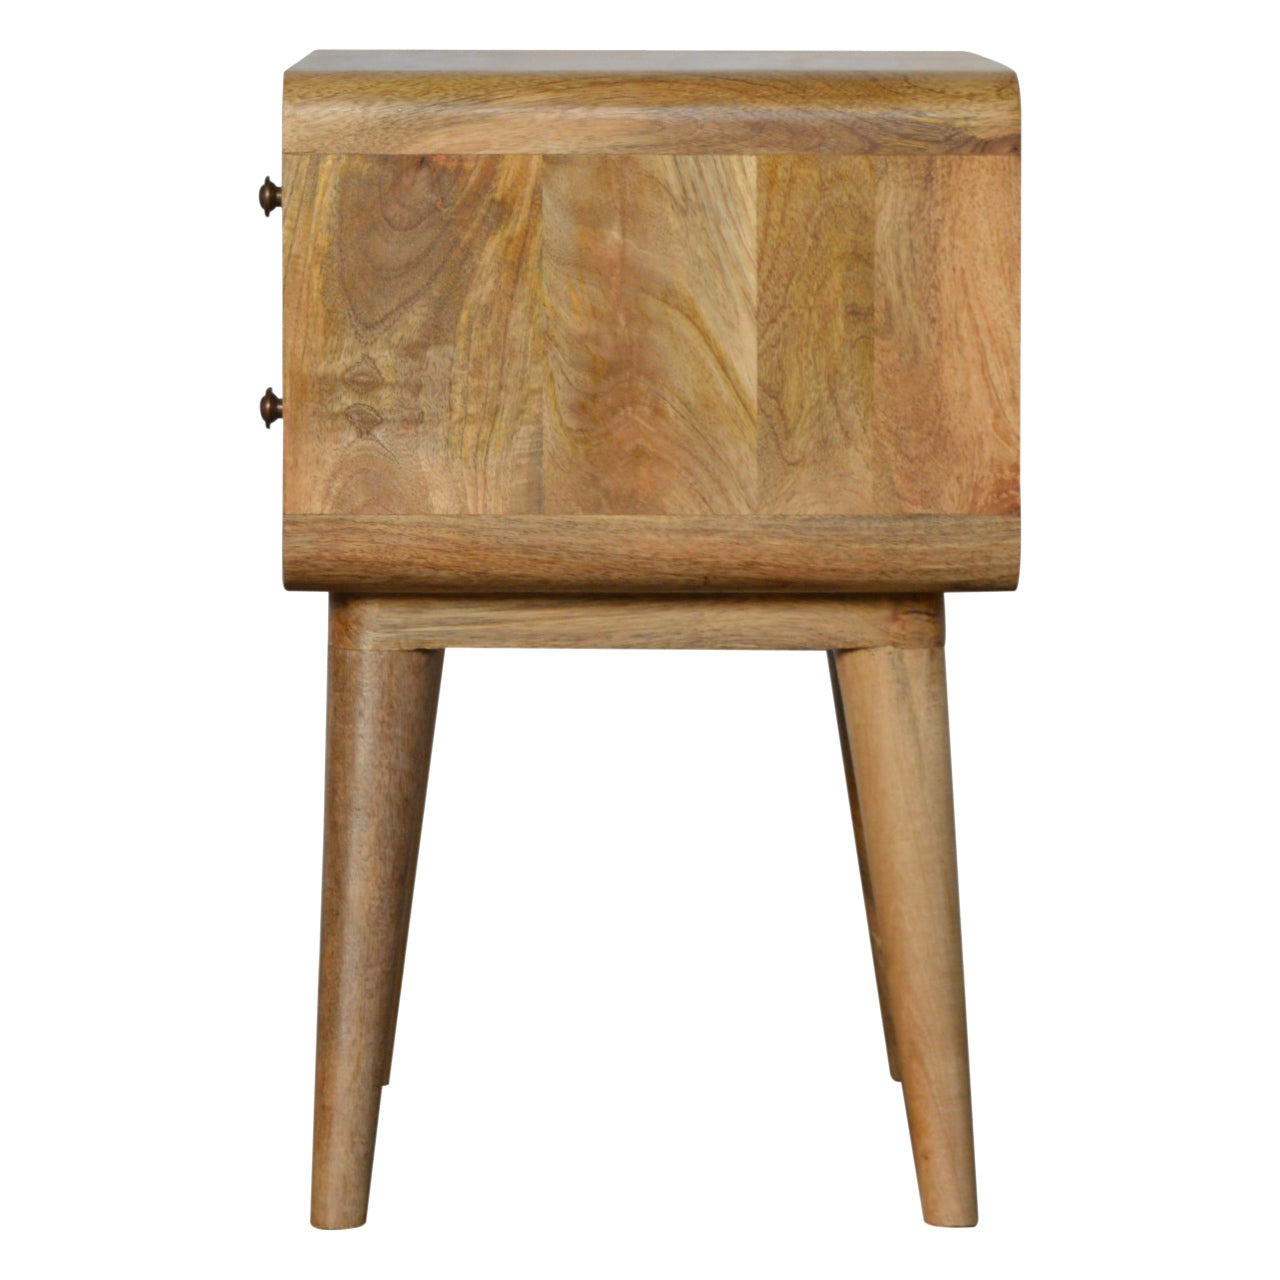 Modal solid wood bedside table with 2 drawers in a natural oak-ish finish | malletandplane.com